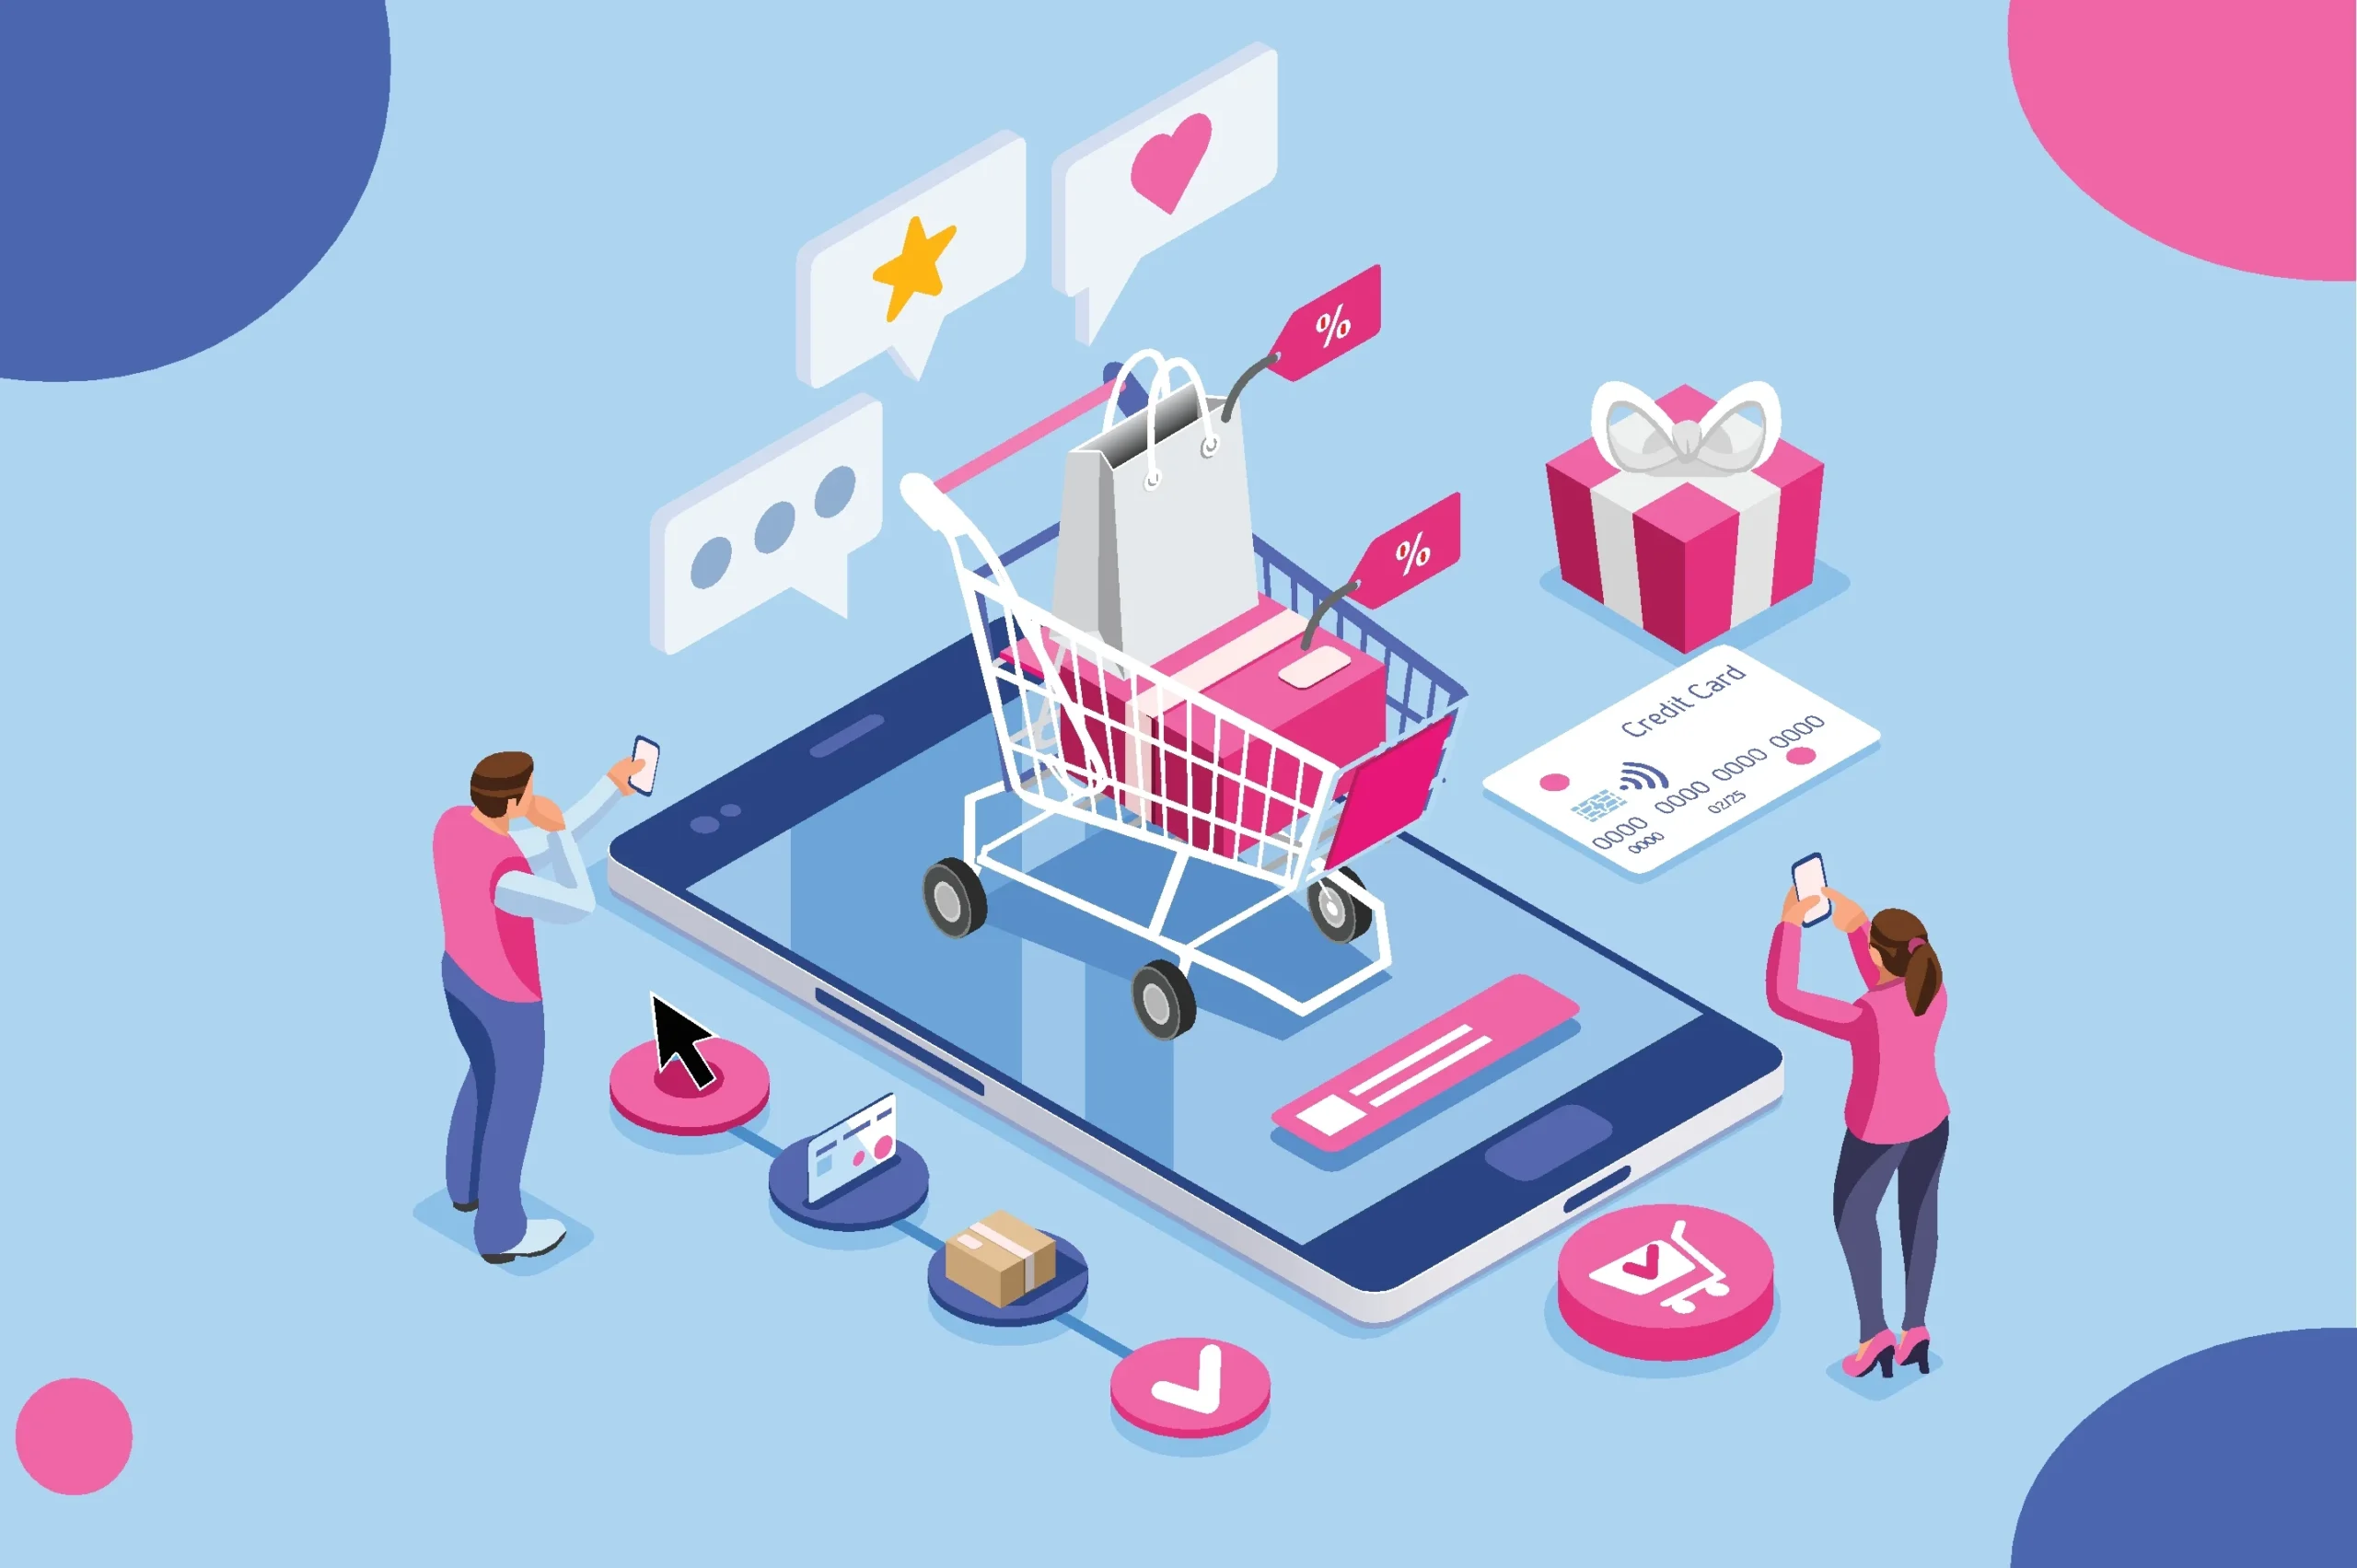 Retail marketing: What it is and how to apply it in your business